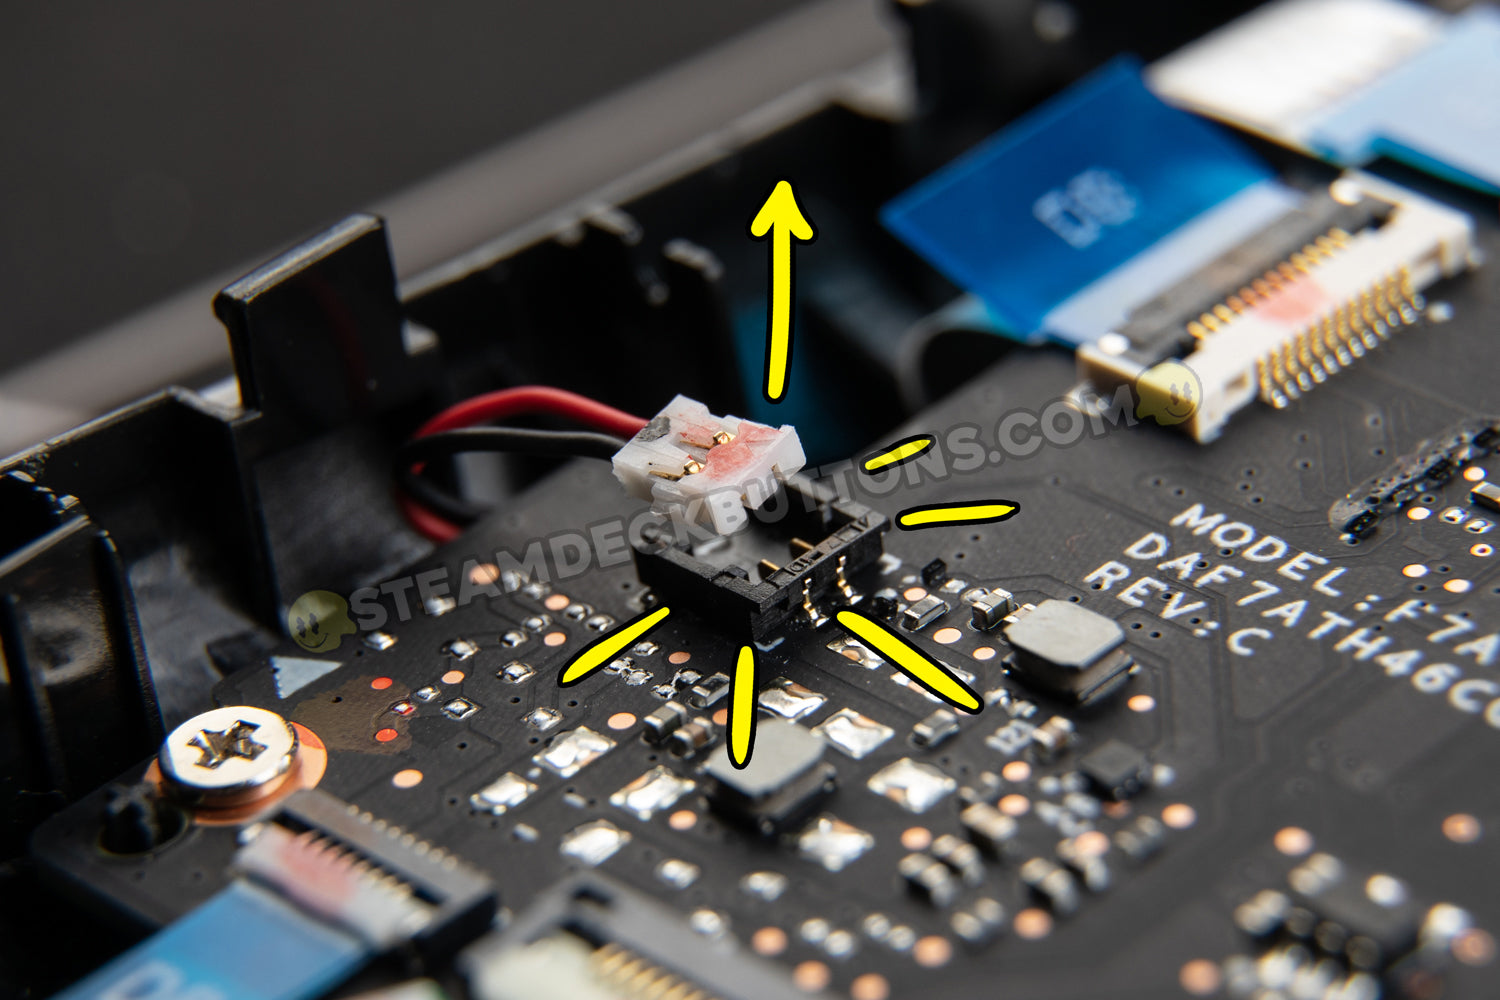 Steam Deck internals remove battery from main board